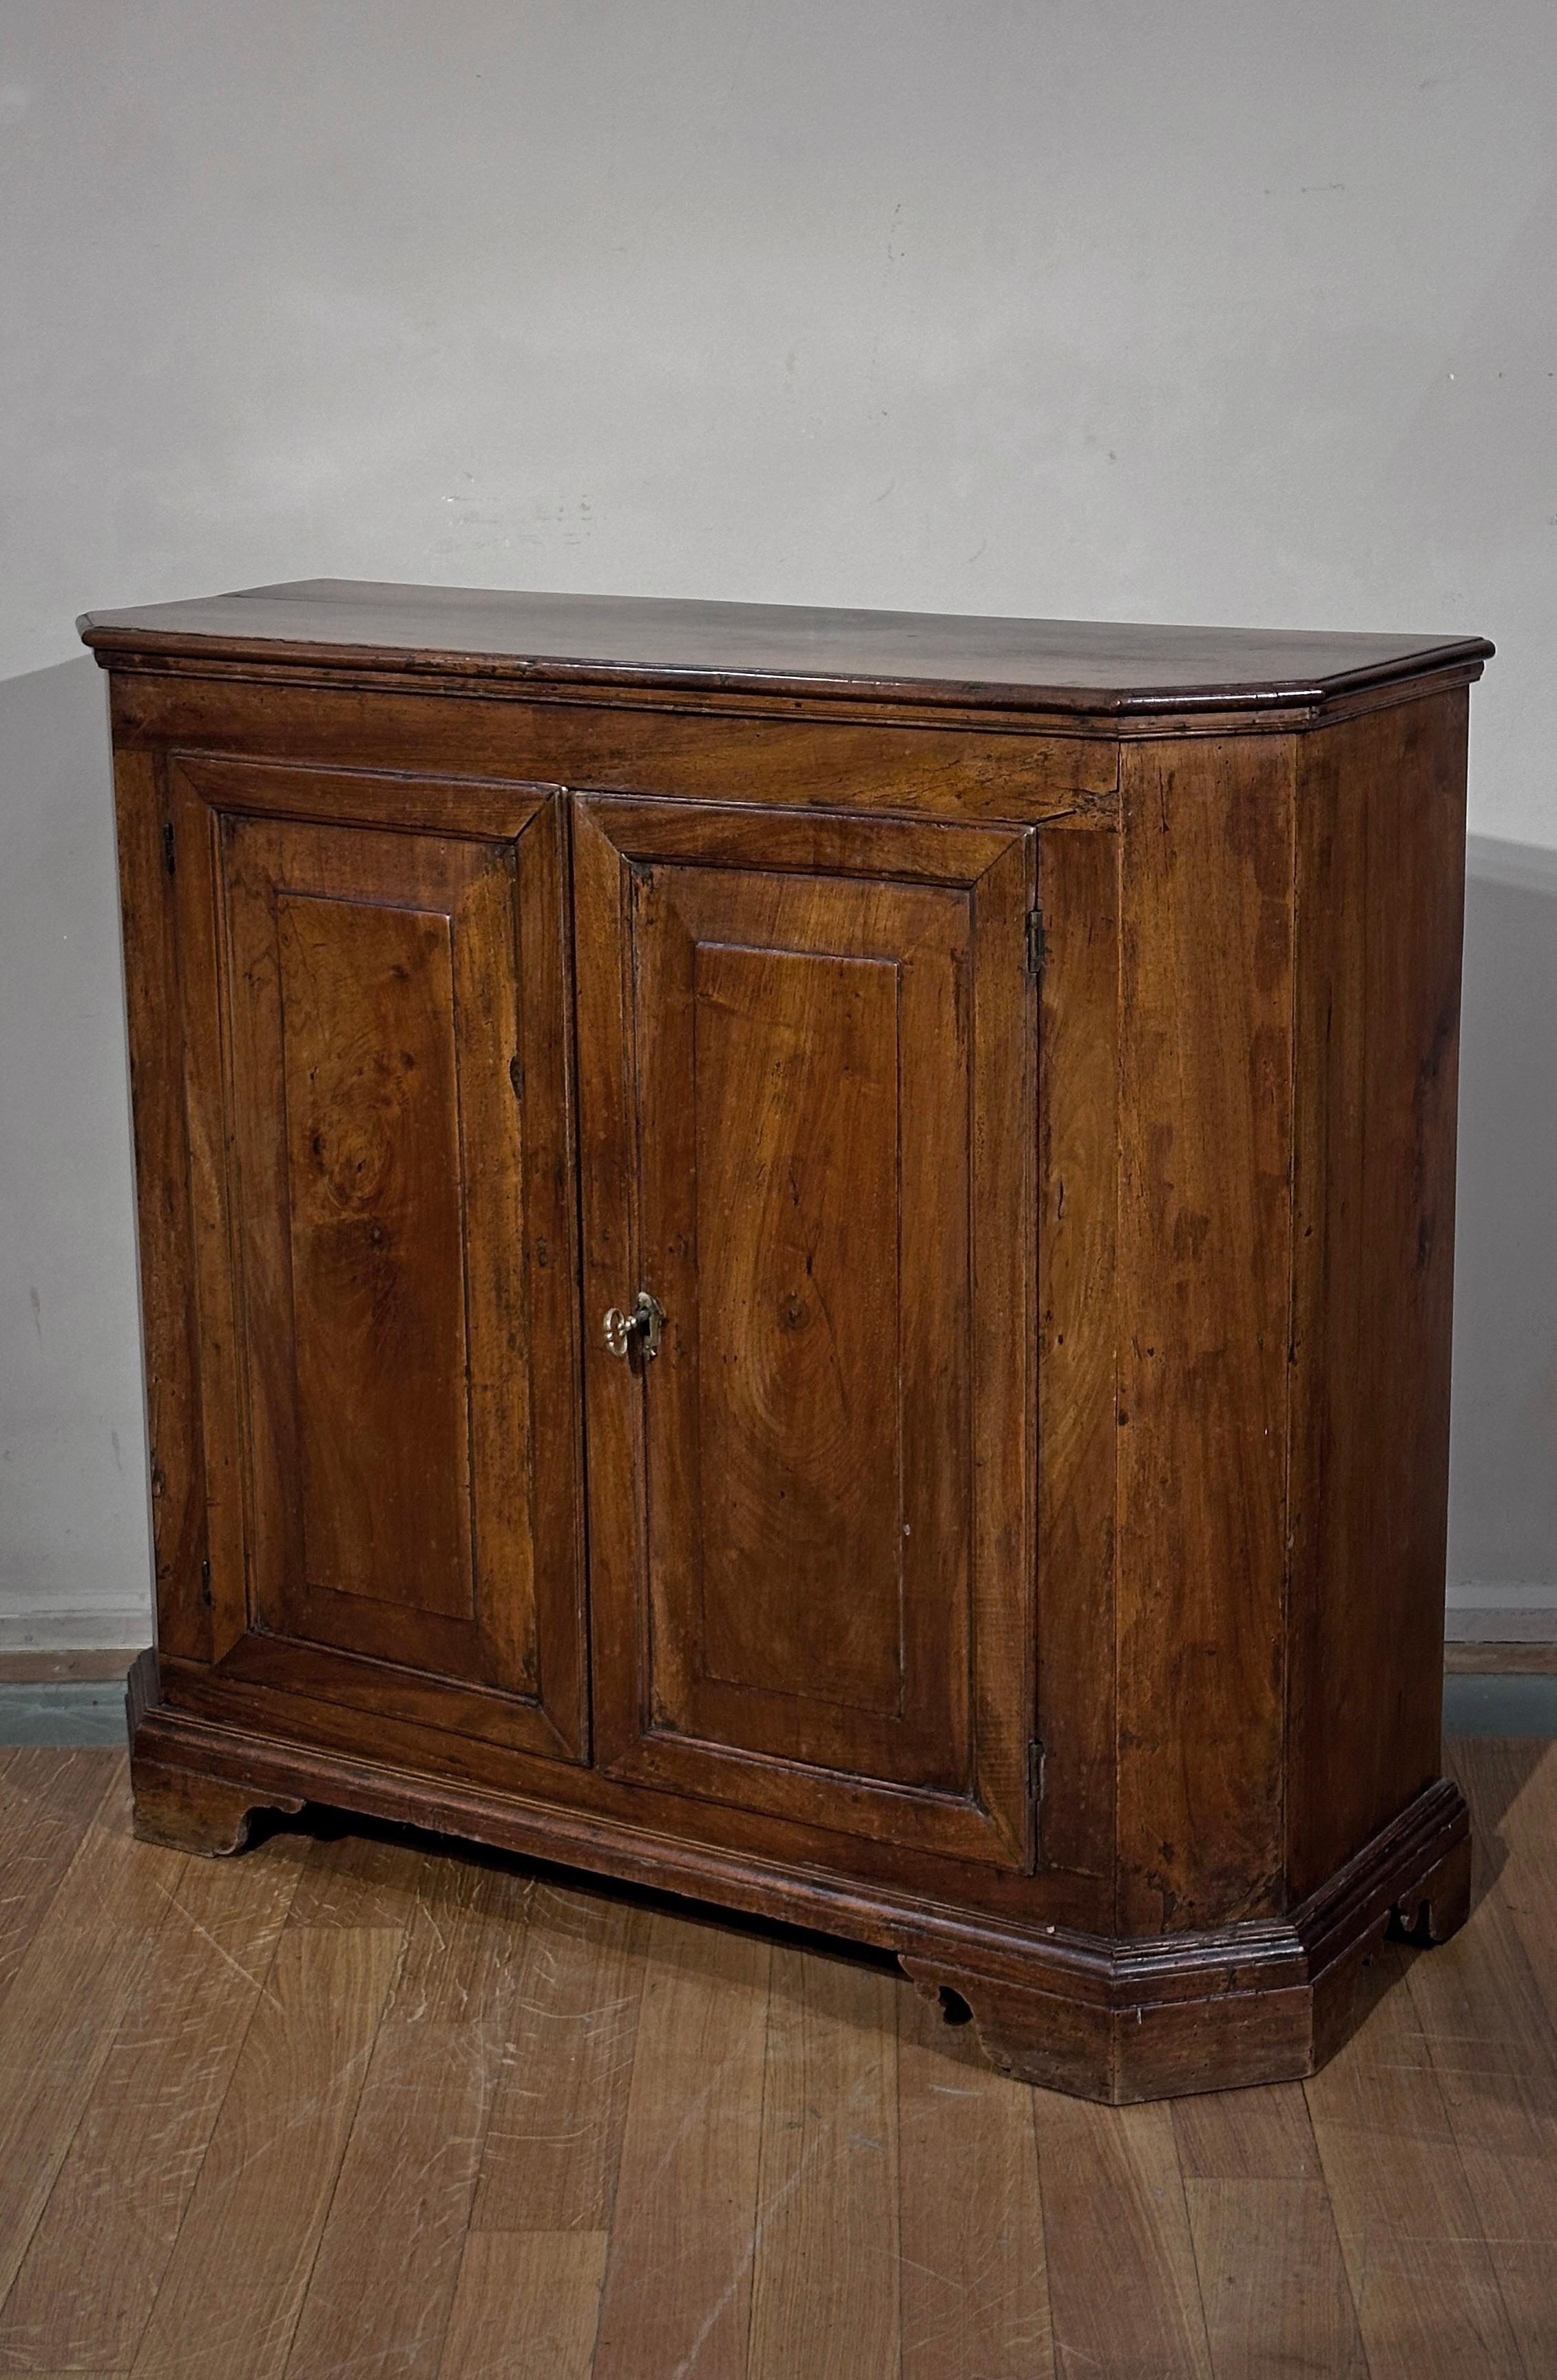 18th CENTURY VENETIAN SMALL SIDEBOARD In Good Condition For Sale In Firenze, FI